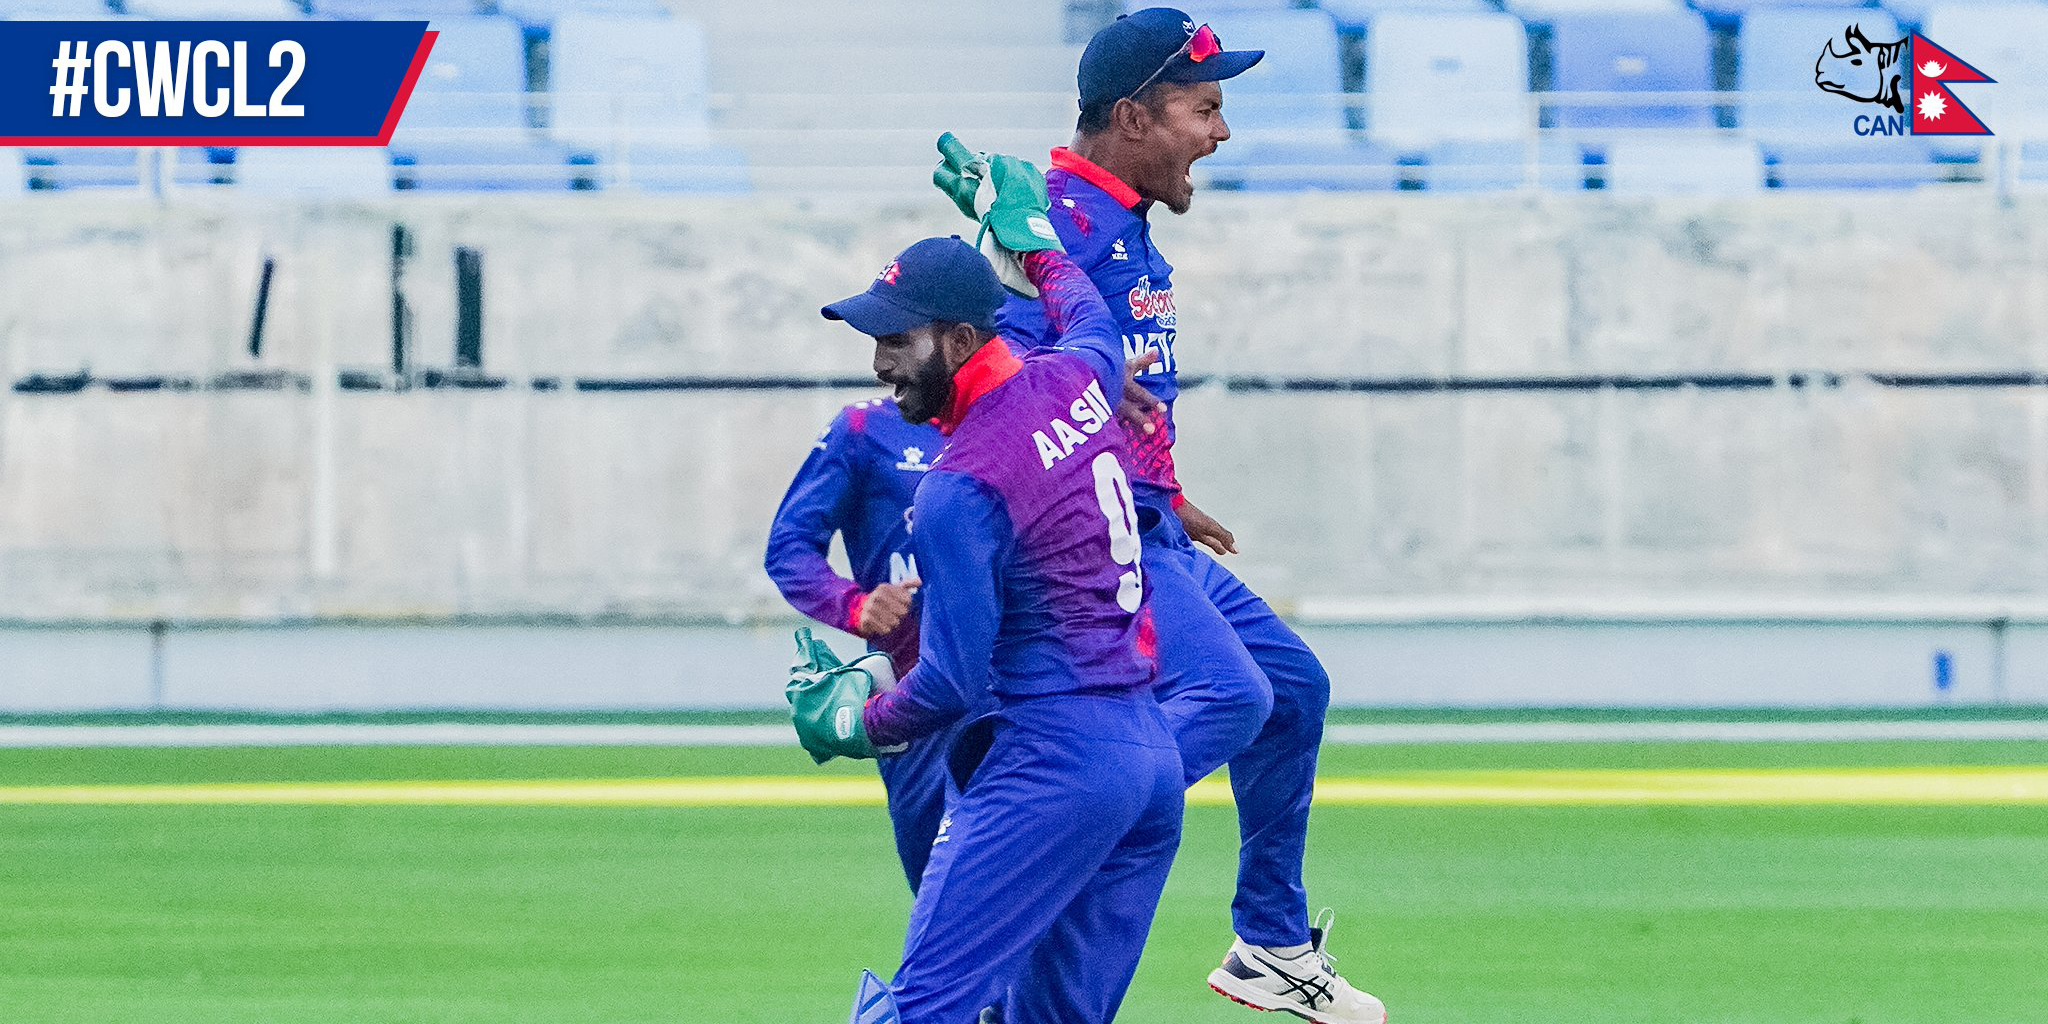 Nepal defeats UAE by 42 runs, climbs to 5th in WCL-2 table